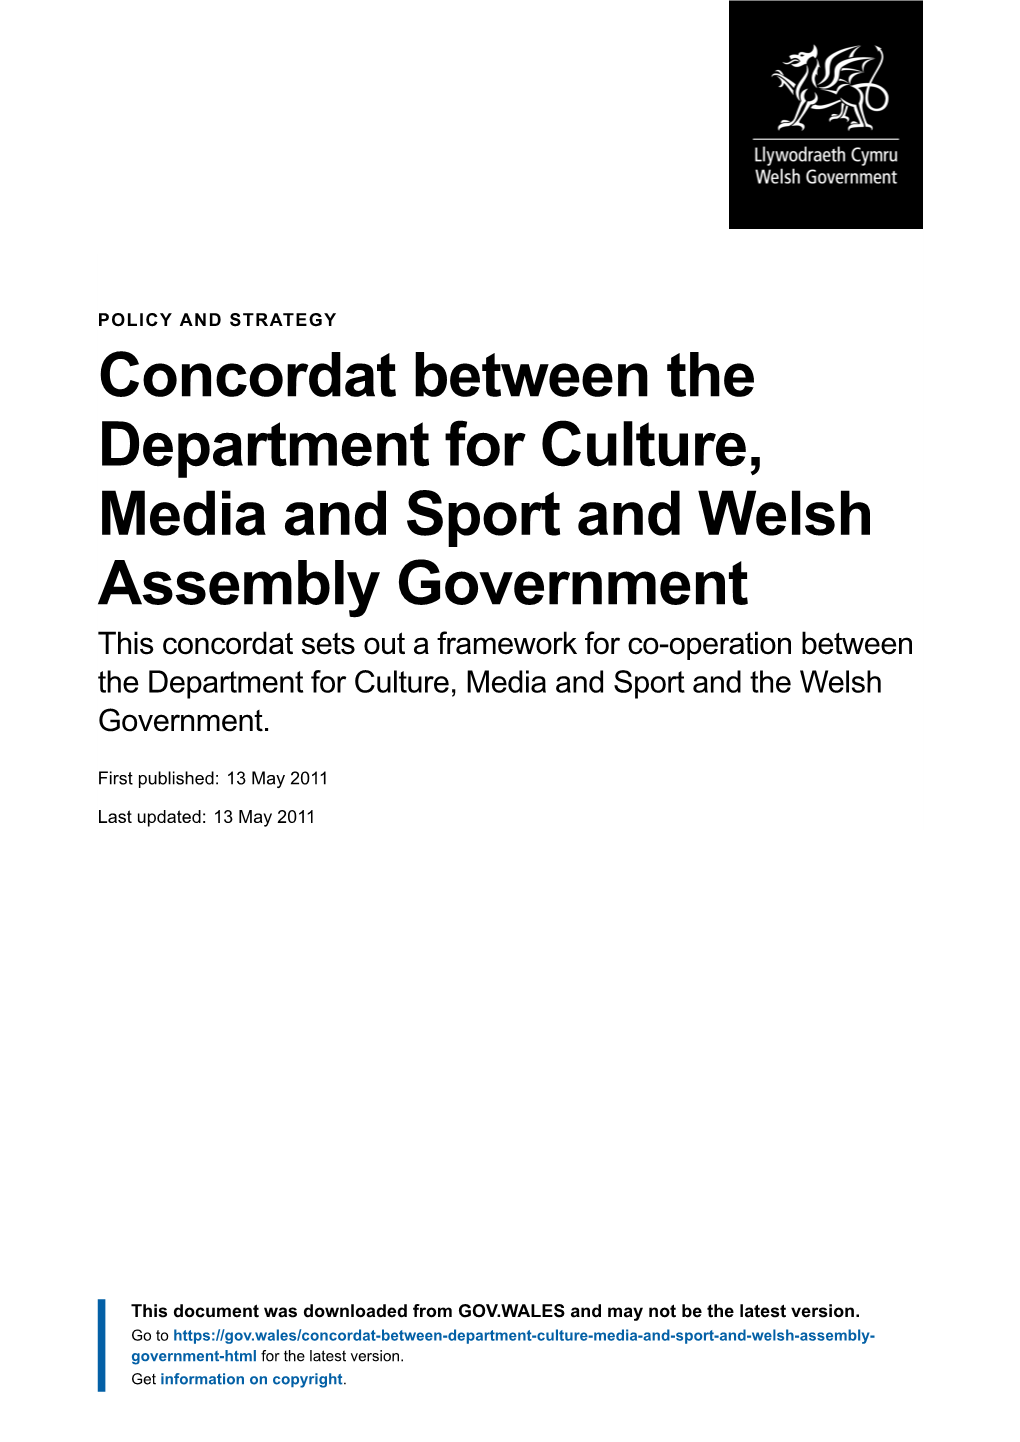 Concordat Between the Department for Culture, Media and Sport and Welsh Assembly Government | GOV.WALES